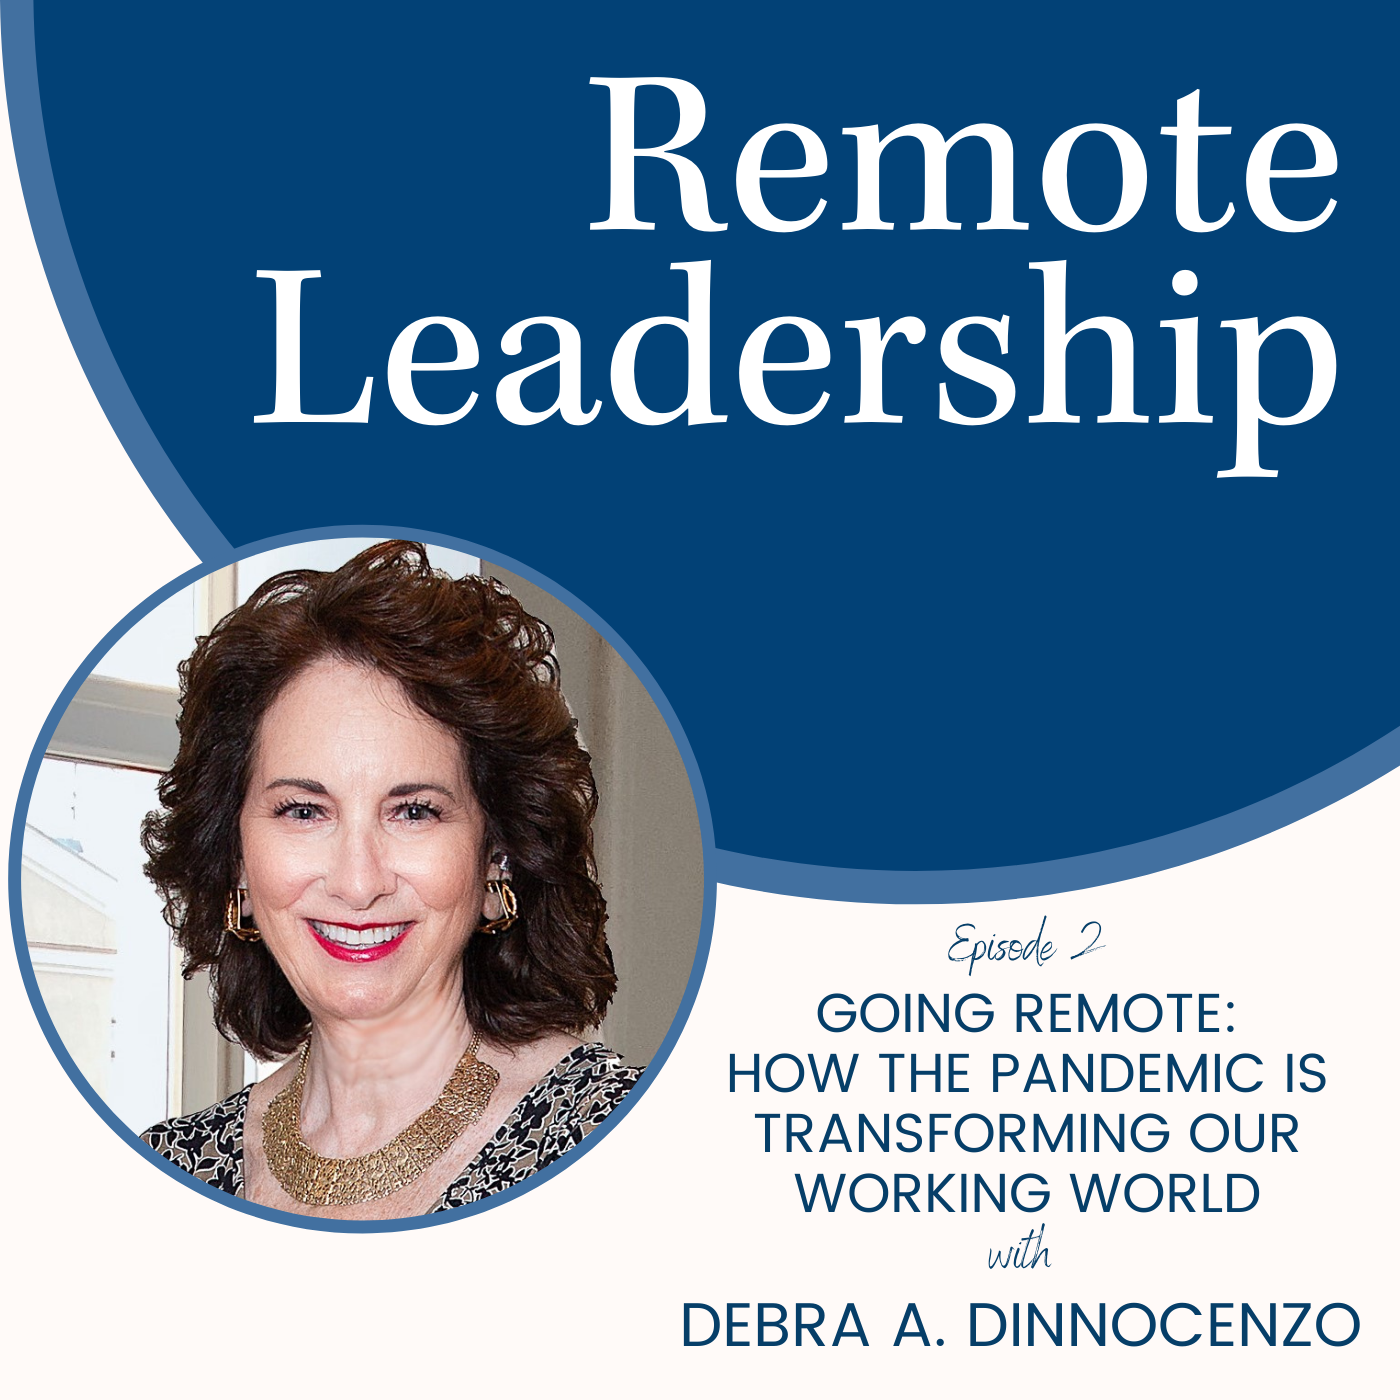 Going Remote: How the Pandemic is Transforming Our Working World